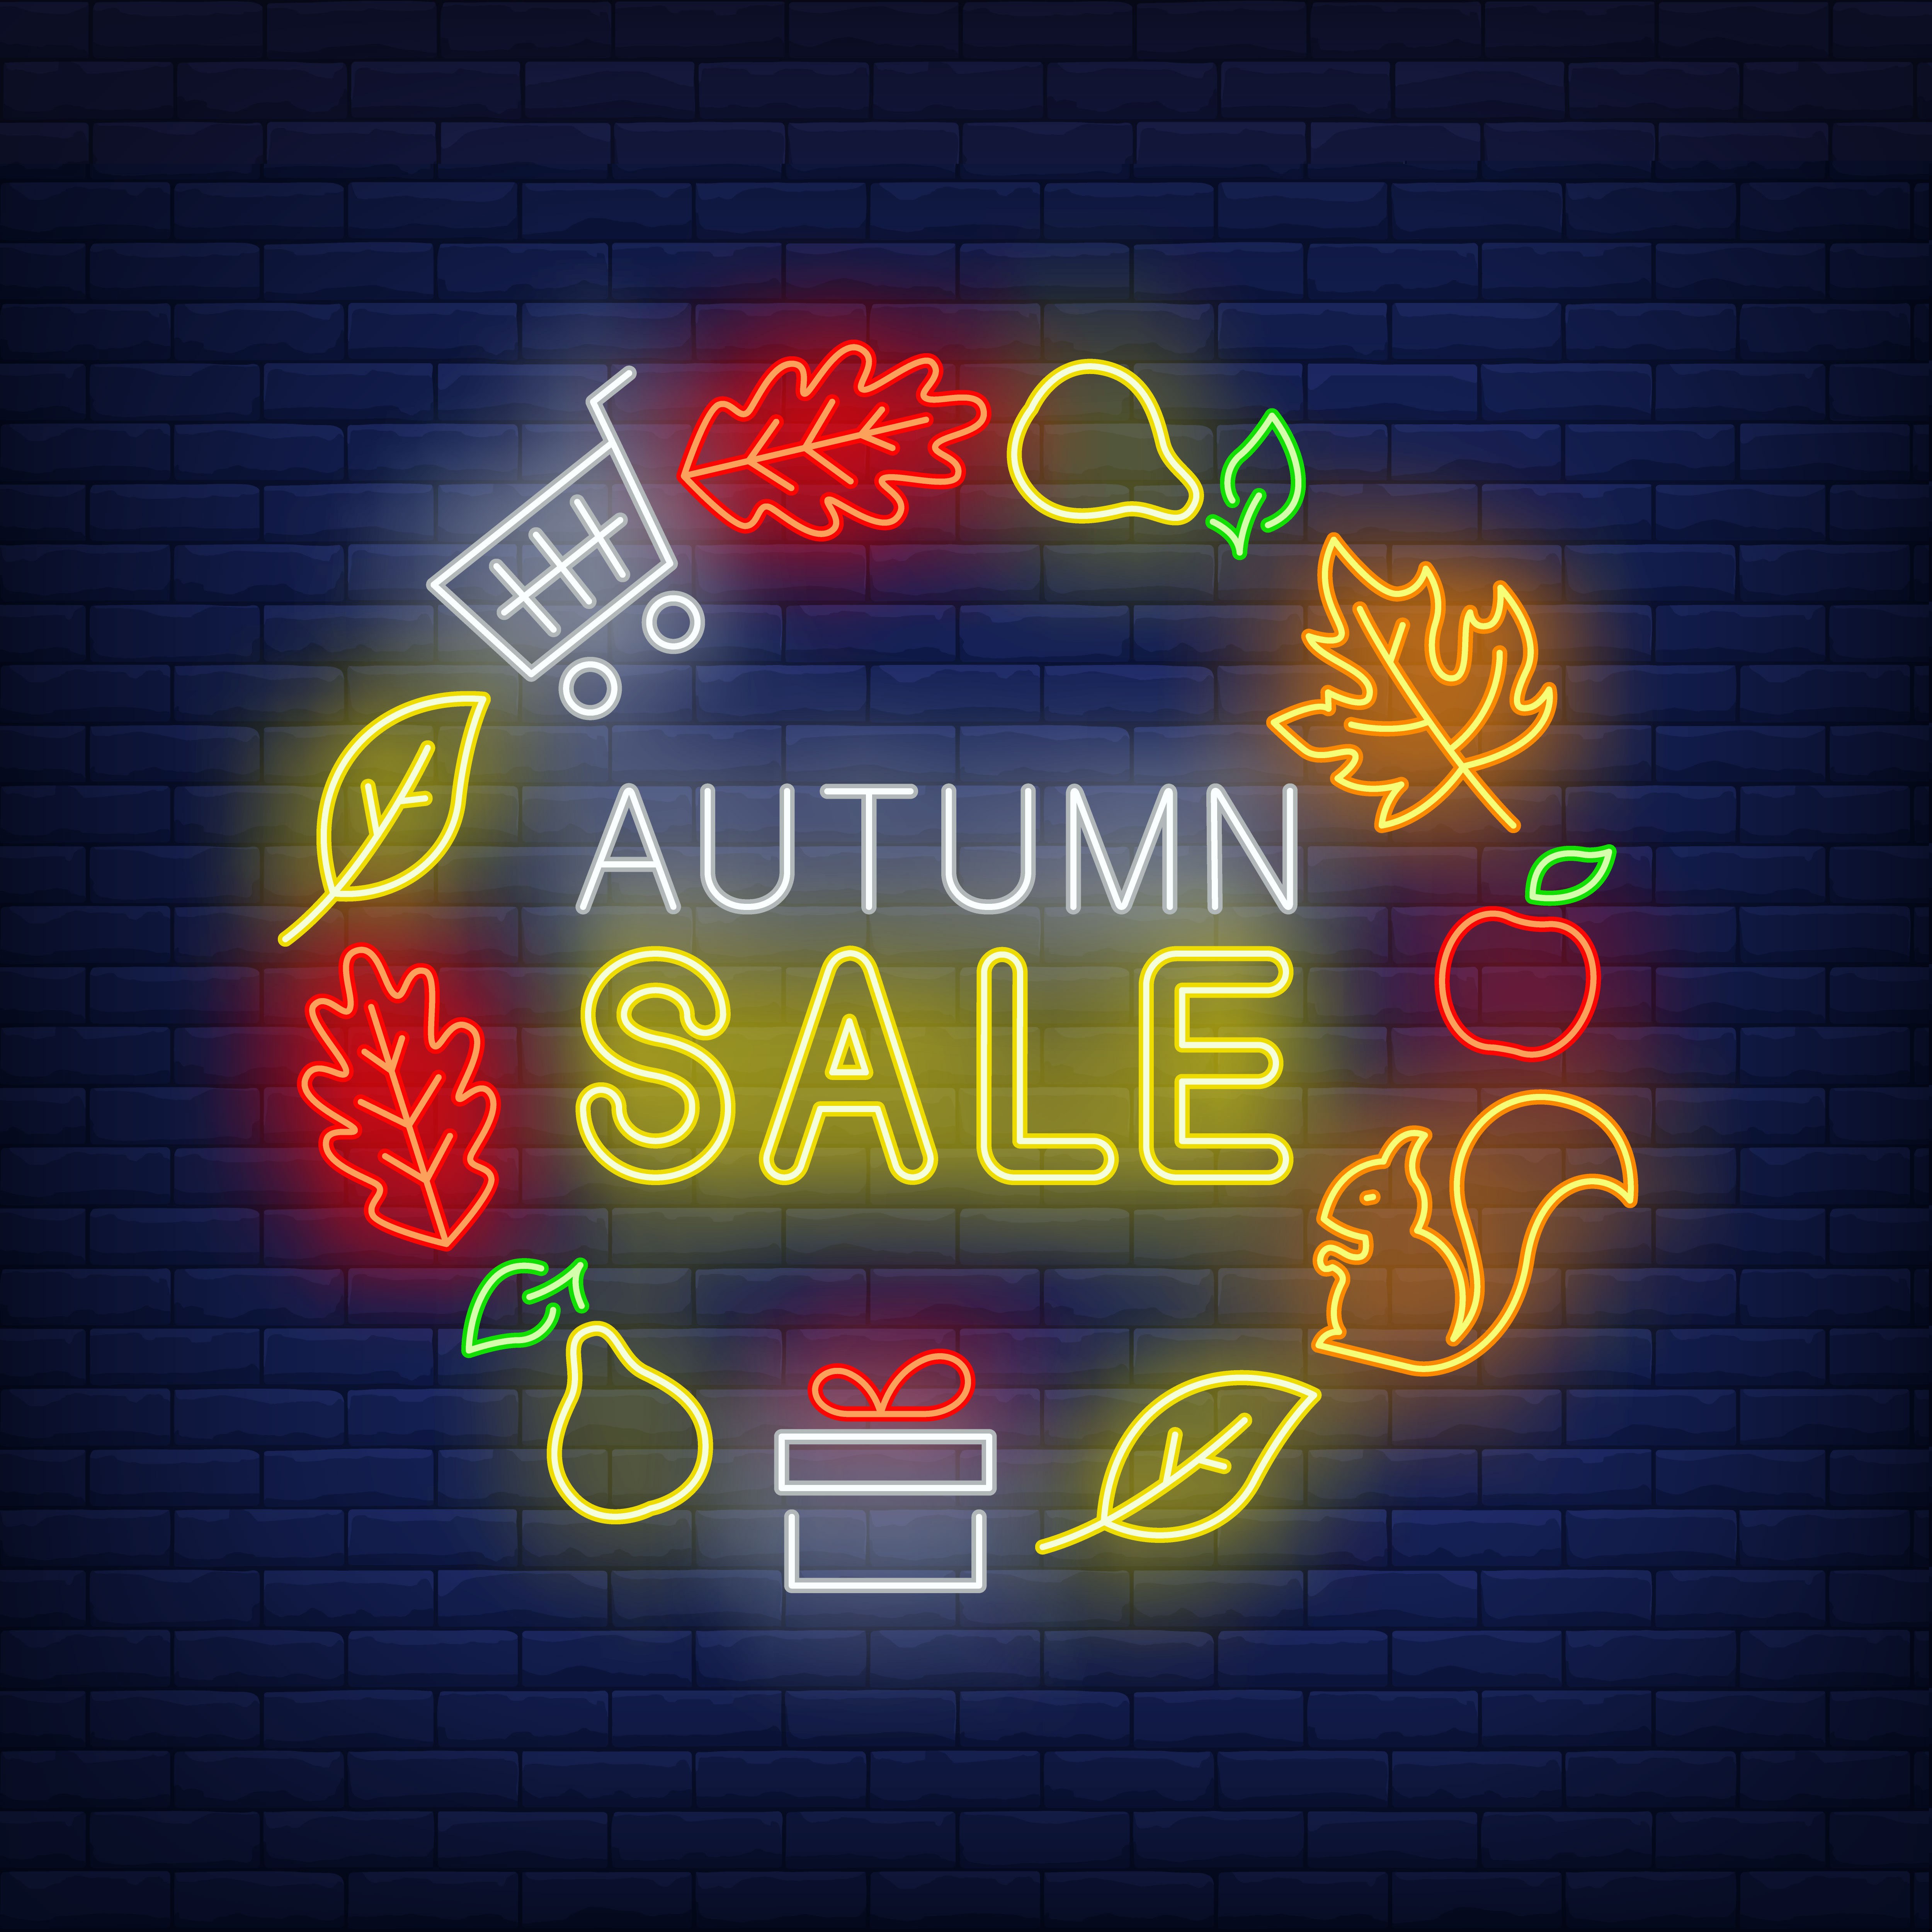 Autumn sale neon lettering with leaves, pears, gift, squirrel